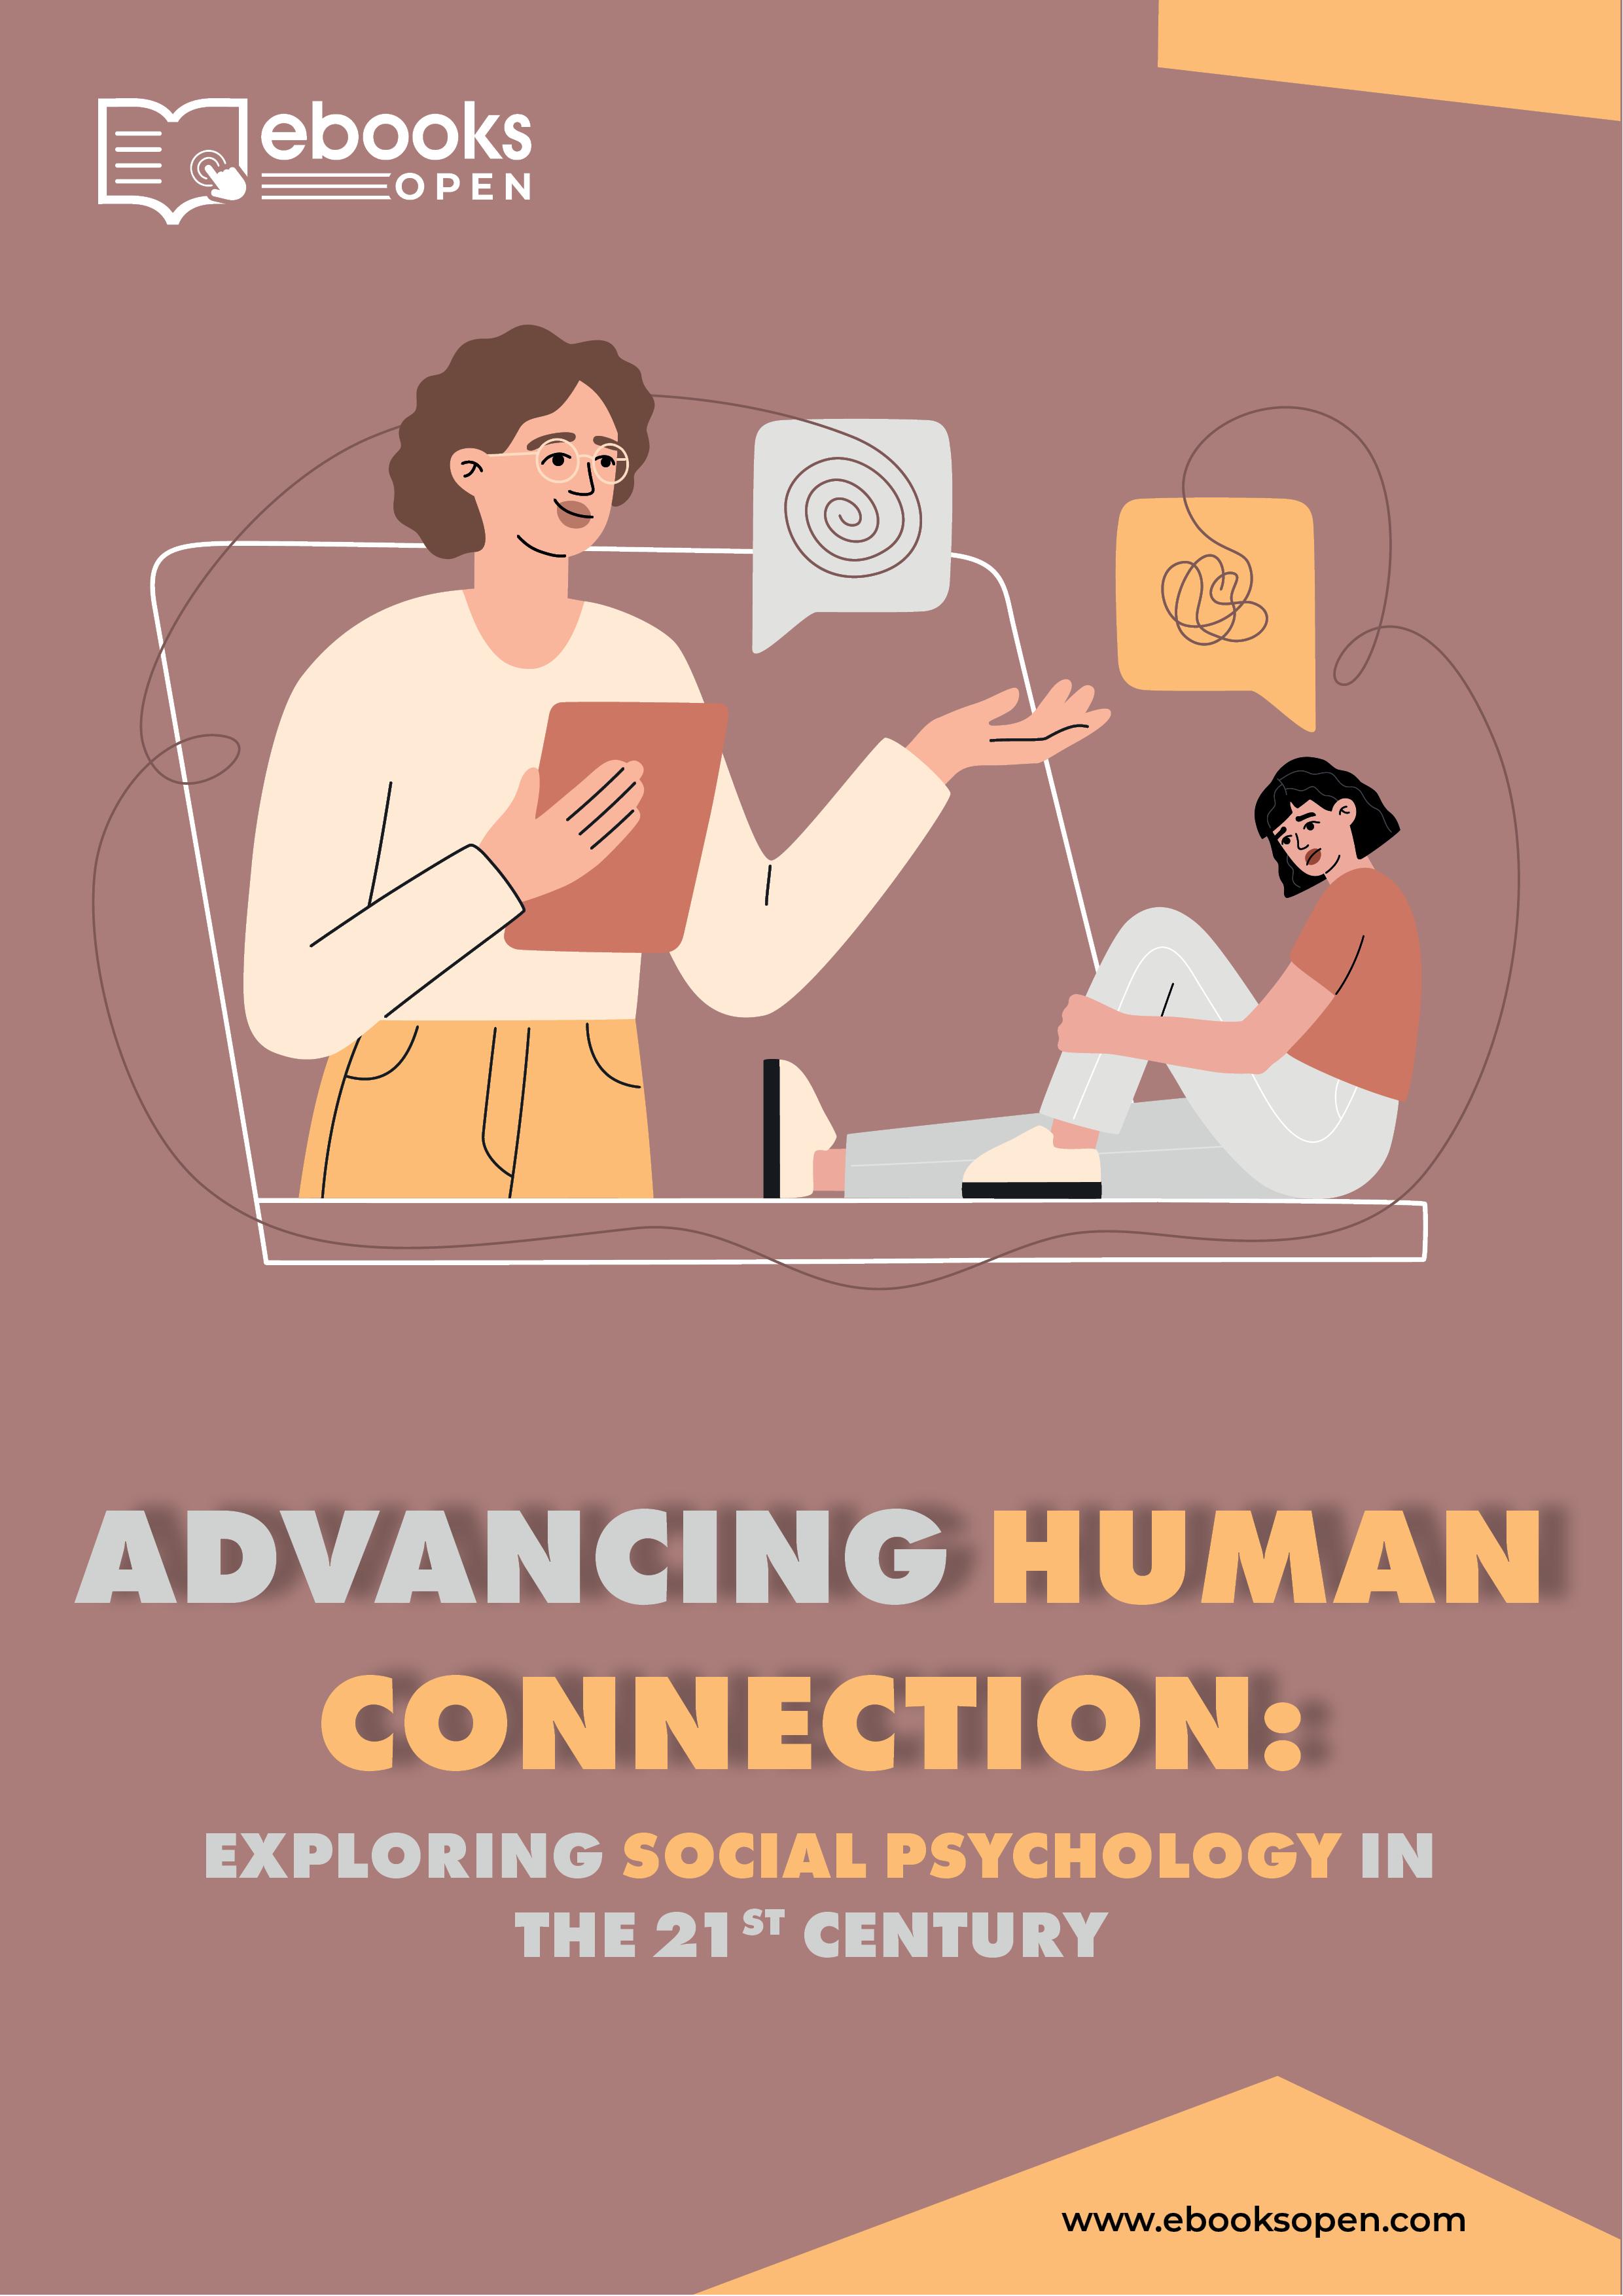 Advancing Human Connection: Exploring Social Psychology in the 21st Century